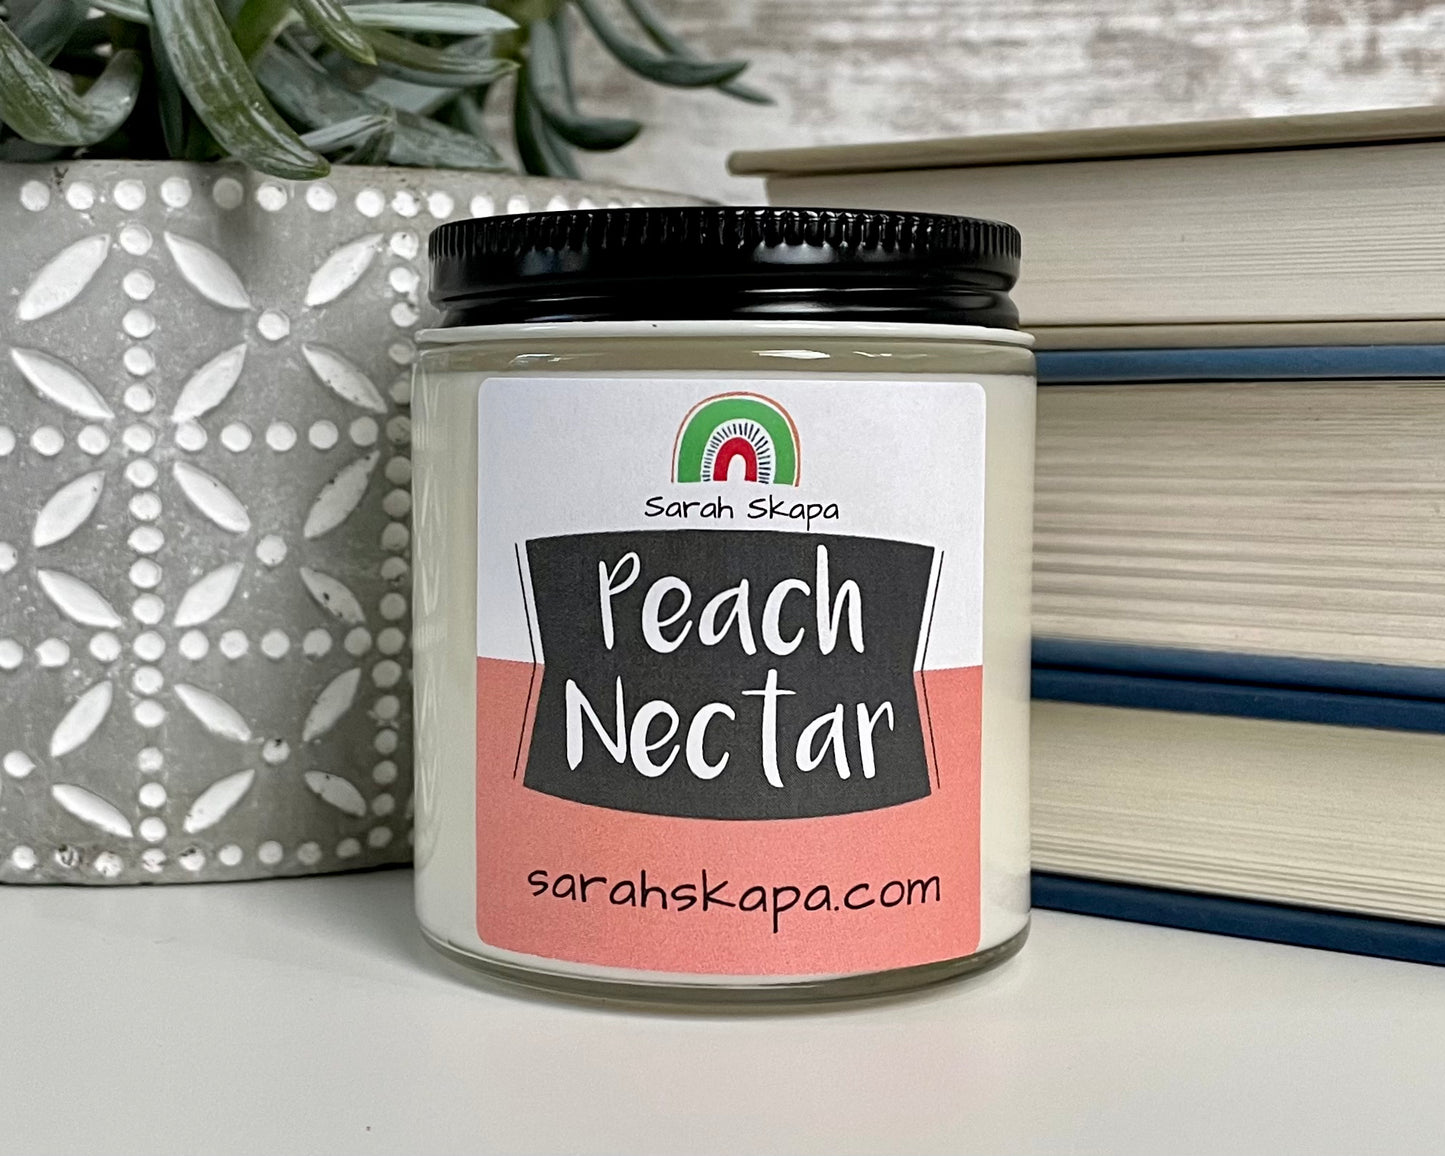 Peach Nectar Scented Soy Candle